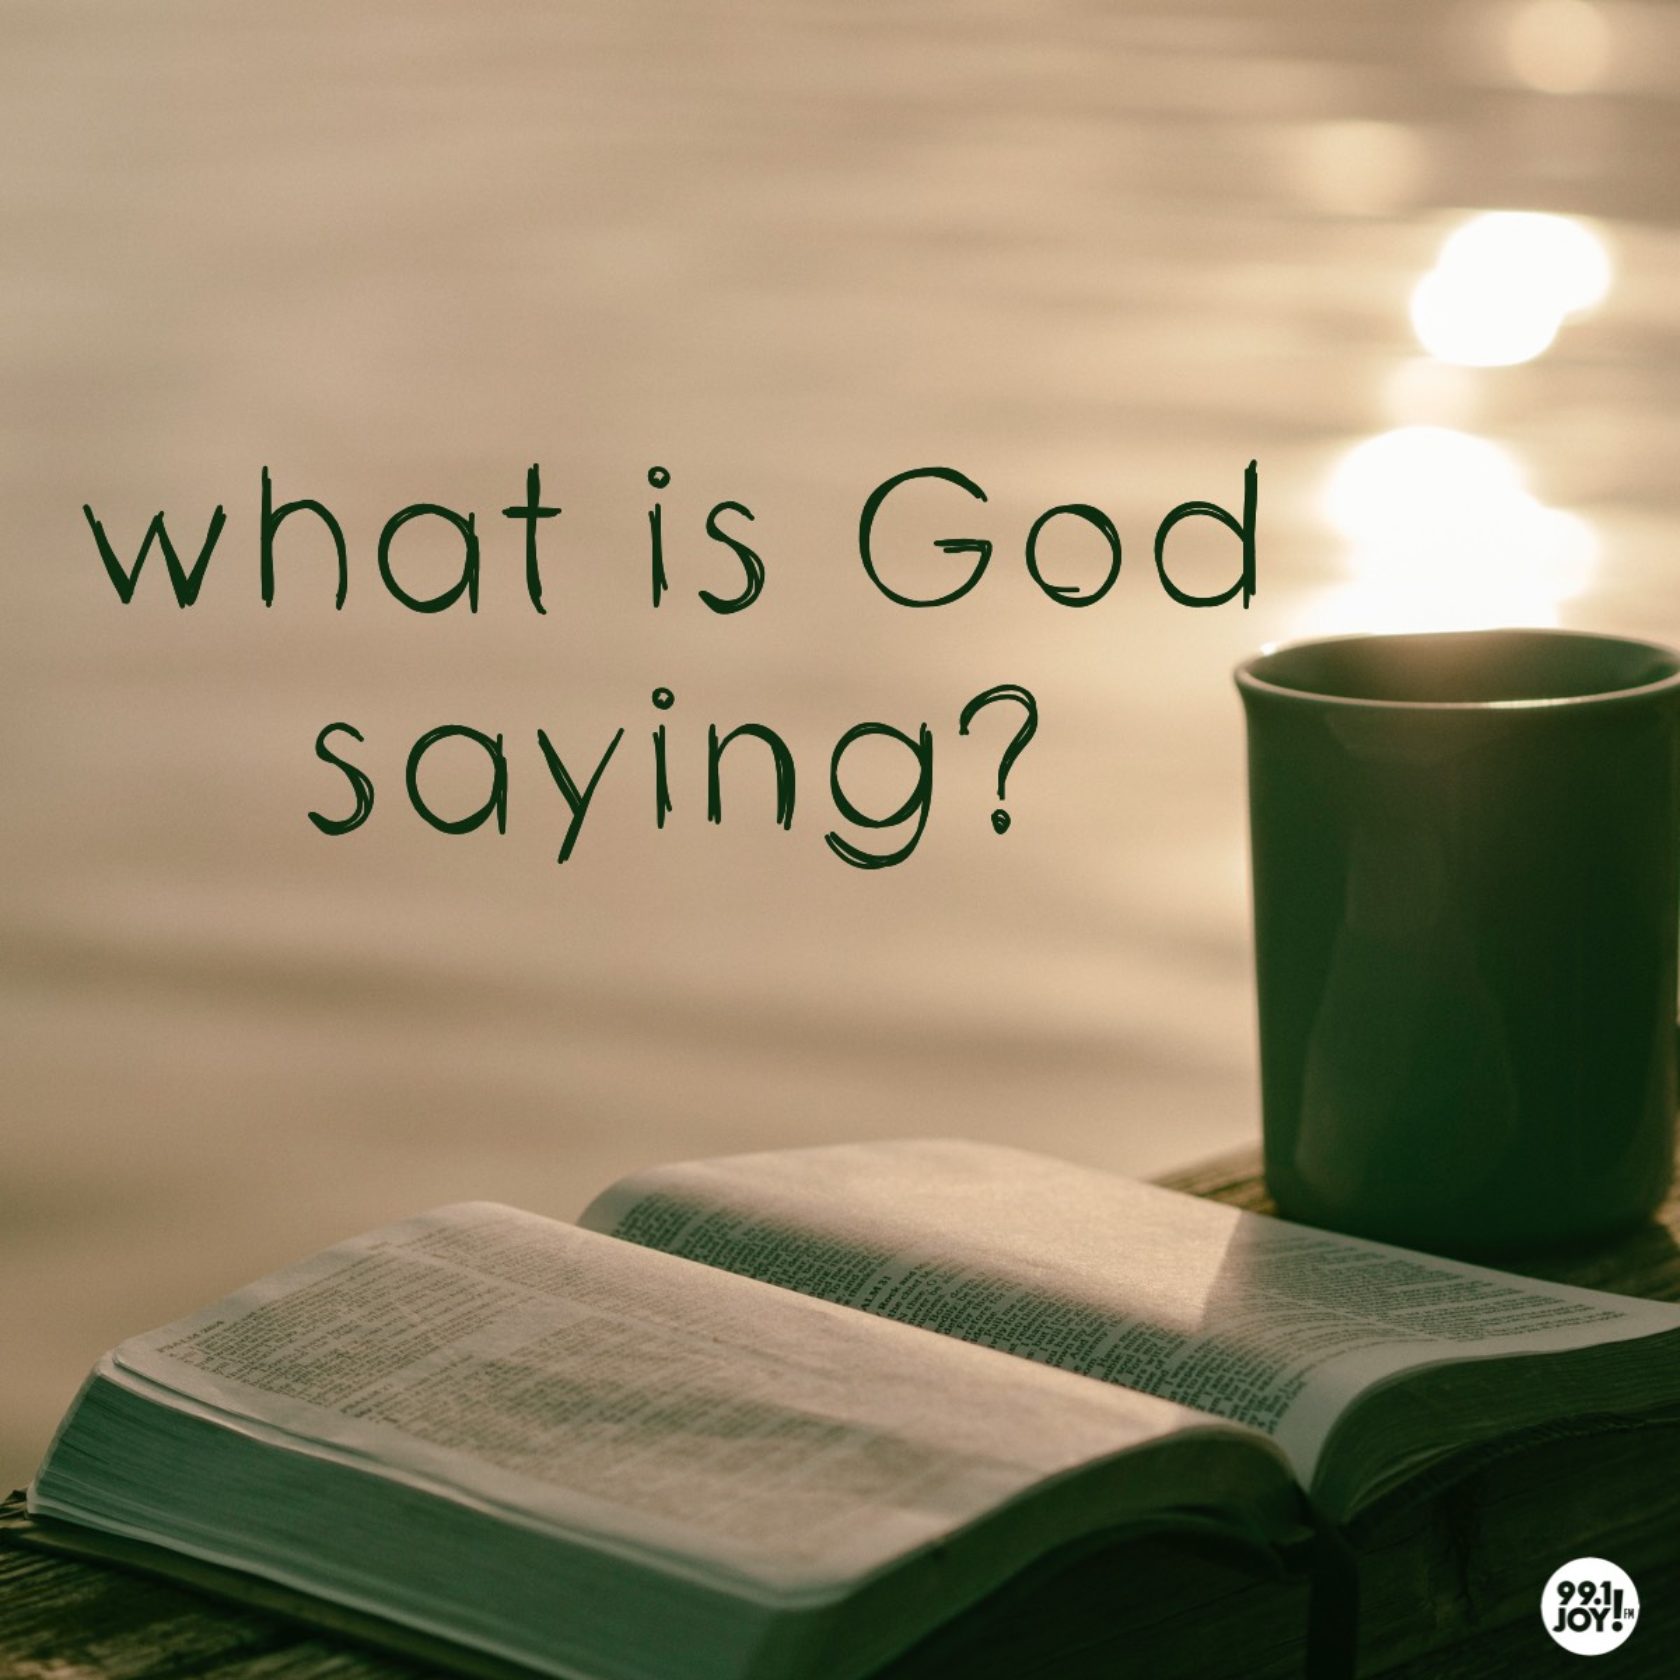 What is God saying?